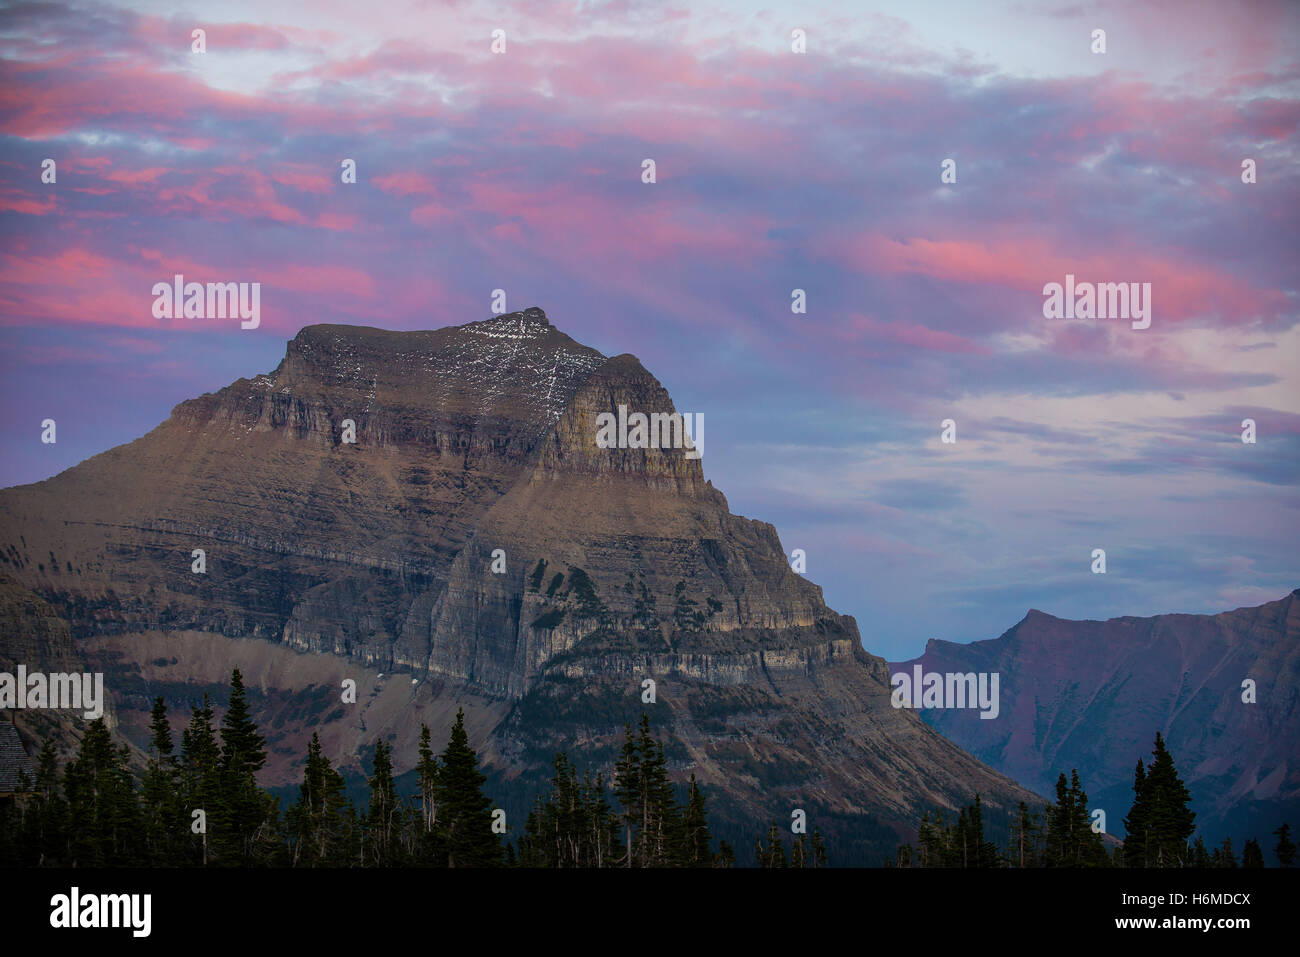 Logan Pass at sunrise, along the Going-to-the-sun highway, Glacier National Park, Montana USA Stock Photo